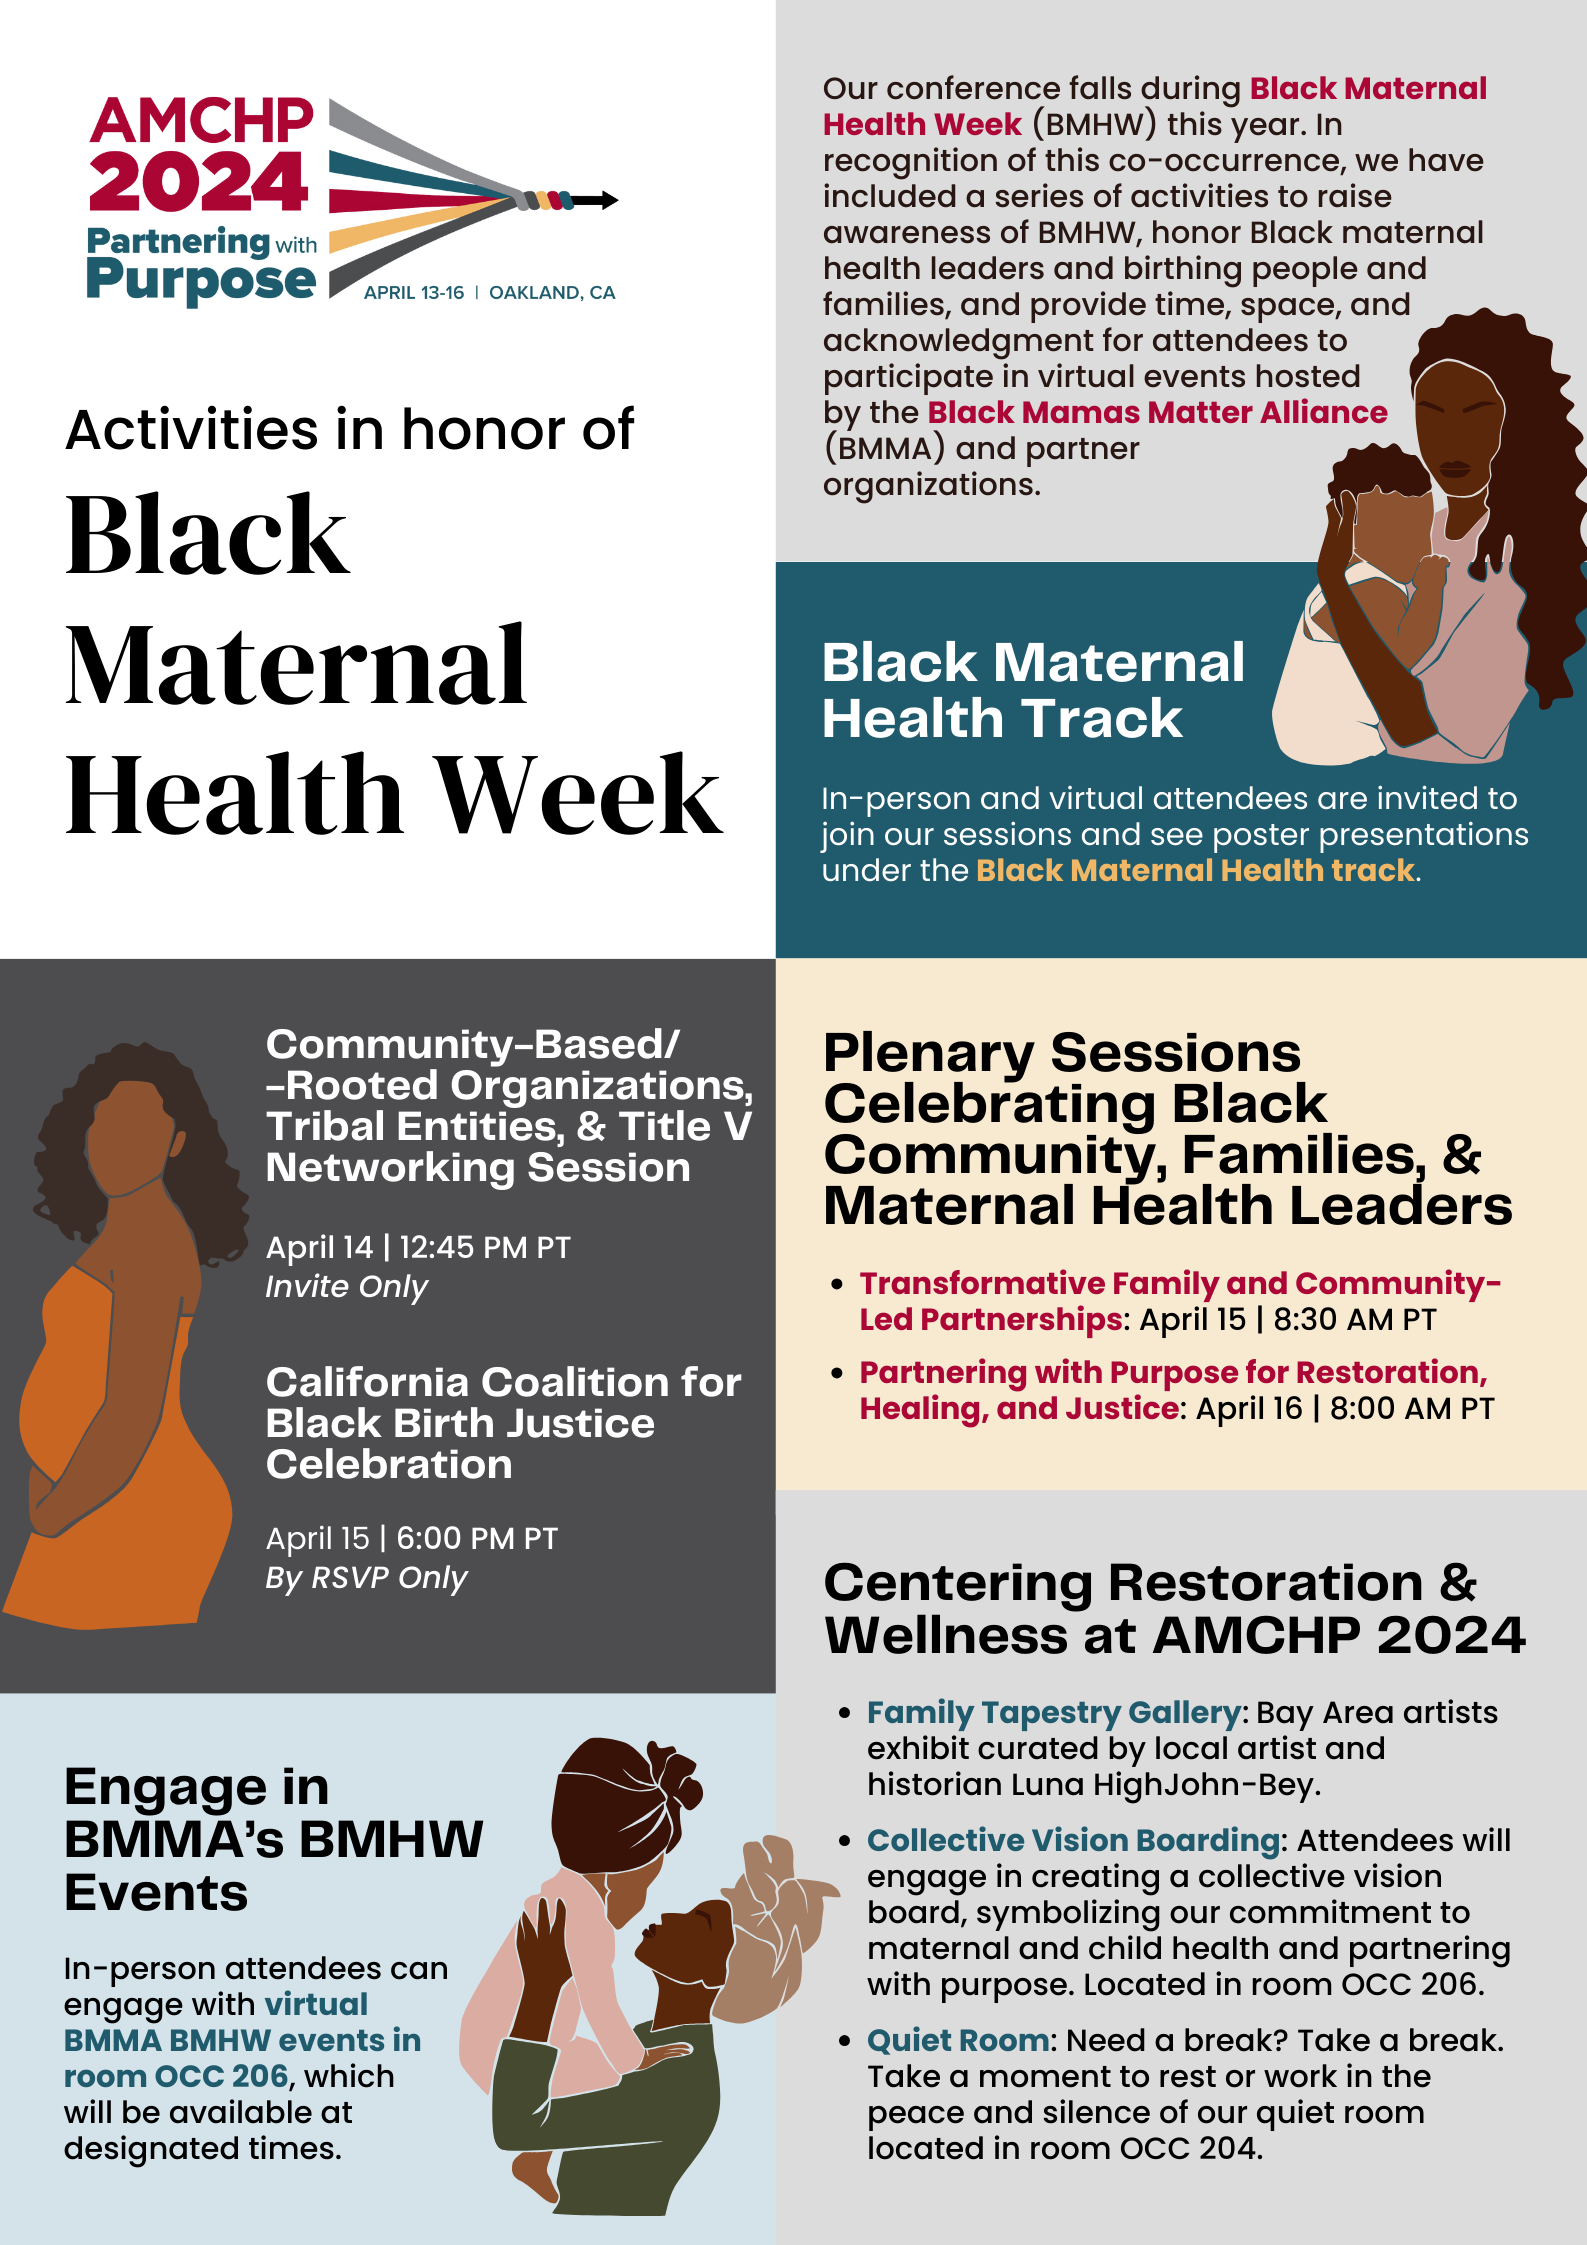 Graphic collating activities in honor of Black Maternal Health Week. More information at: https://amchp.org/wp-content/uploads/2024/03/BMHW-Flyer-FV-1.pdf